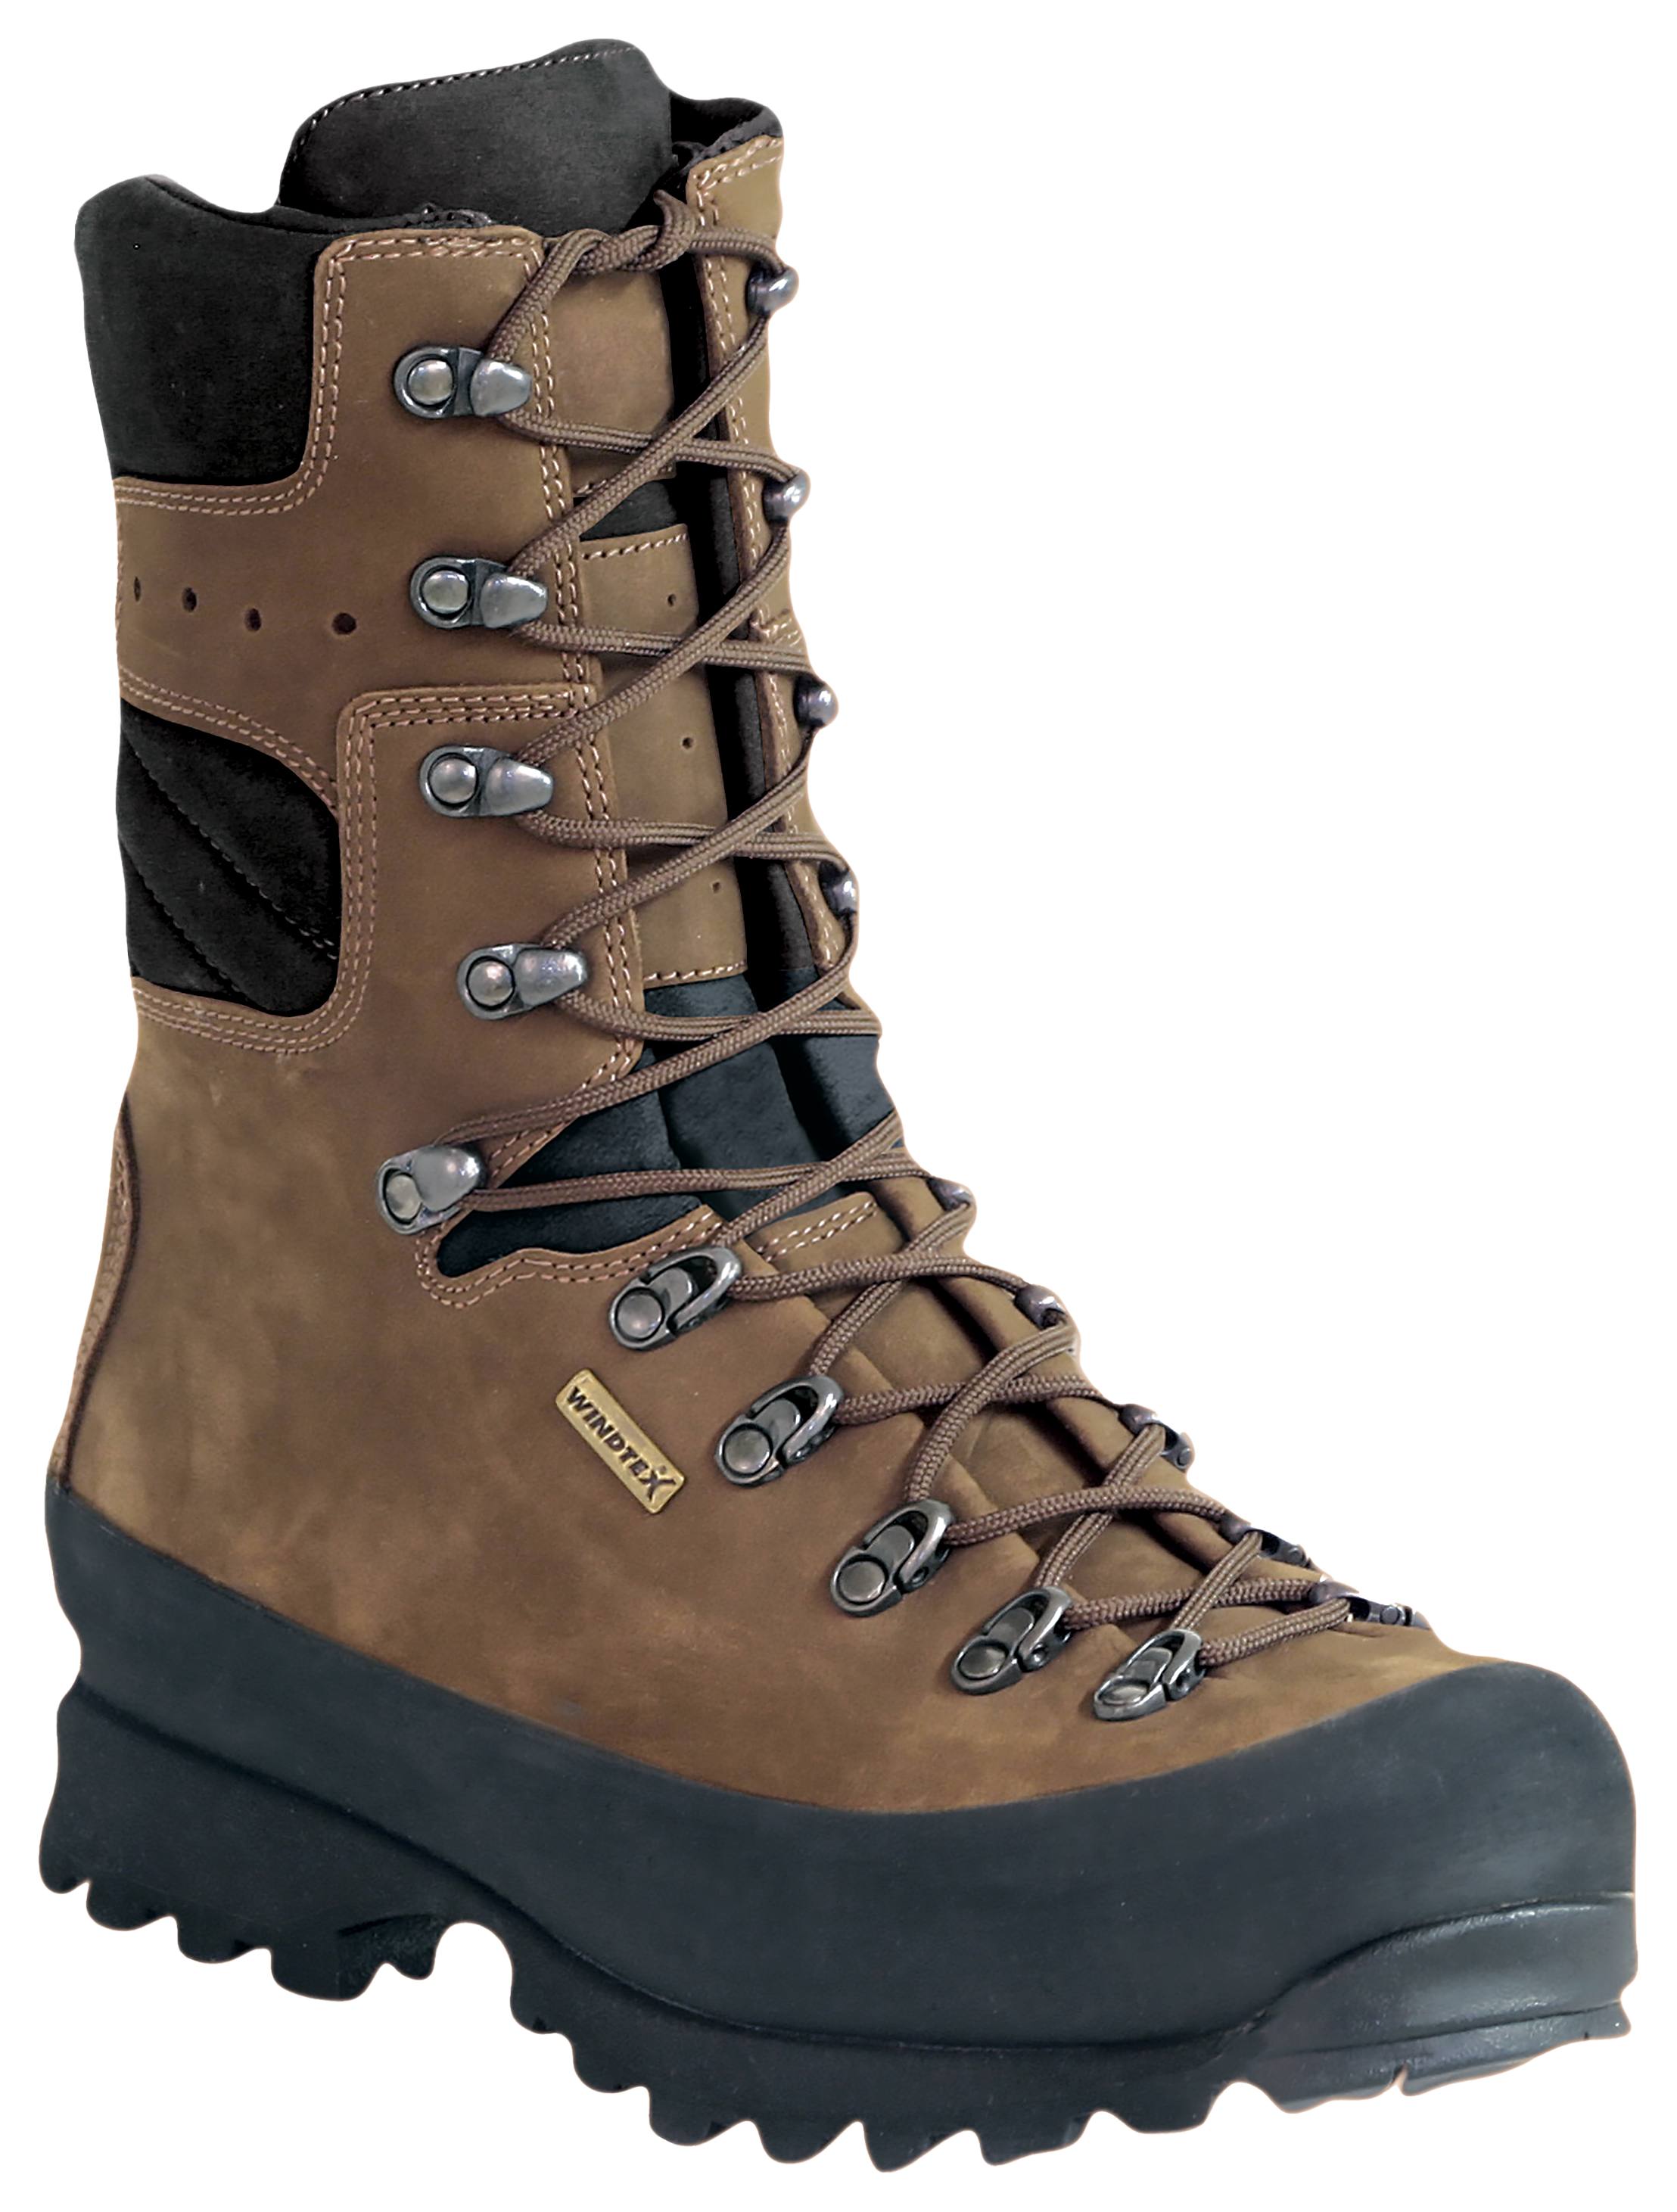 Kenetrek Mountain Extreme 1000 Insulated Waterproof Hunting Boots for Men - Brown - 13M